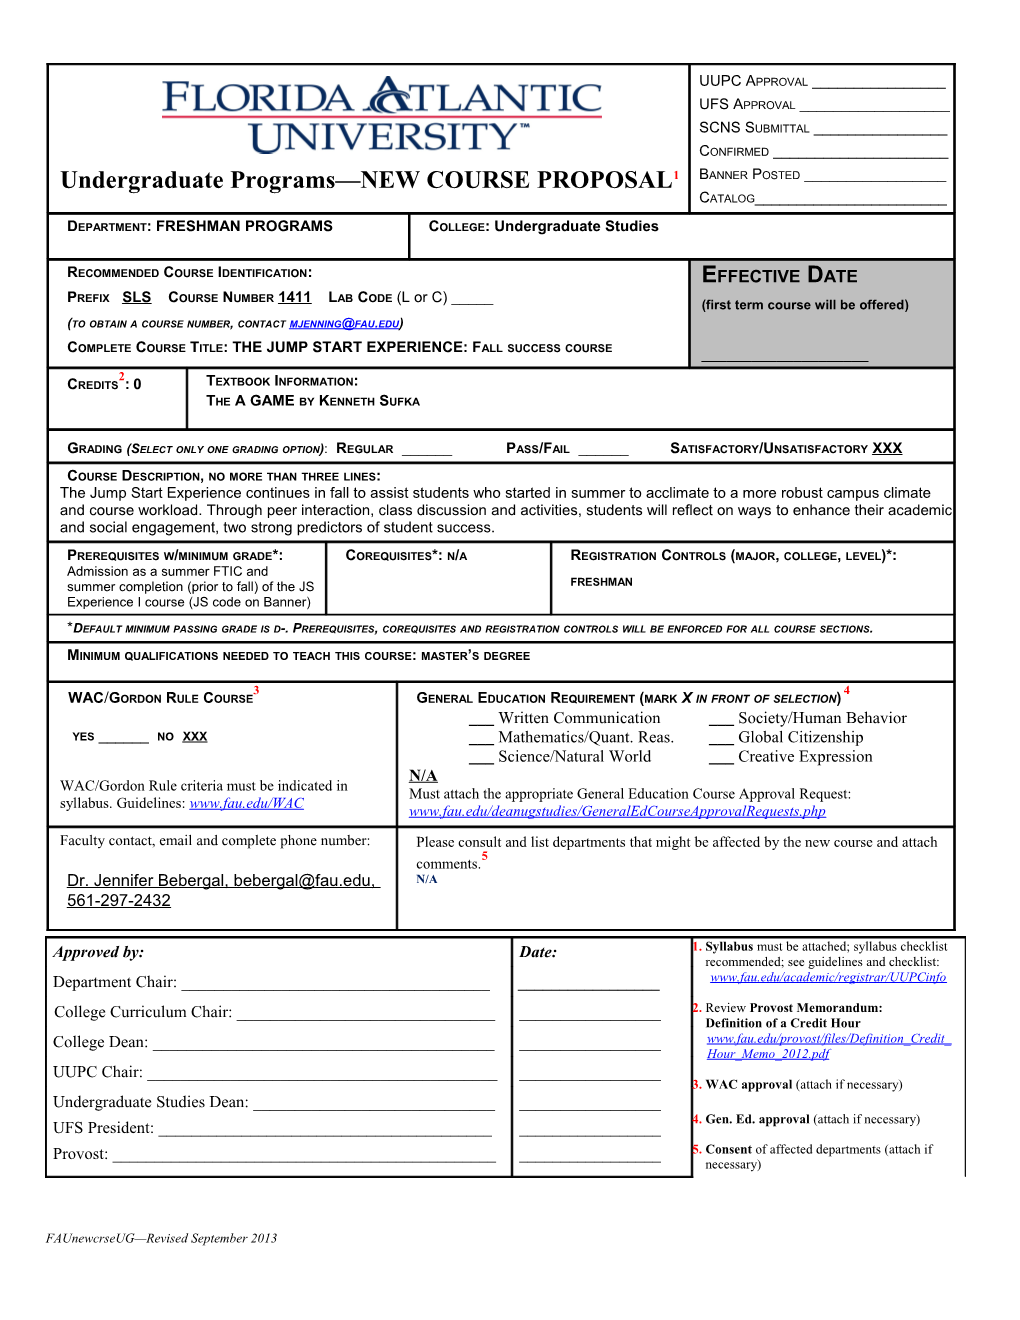 CD037, Course Termination Or Change Transmittal Form s8